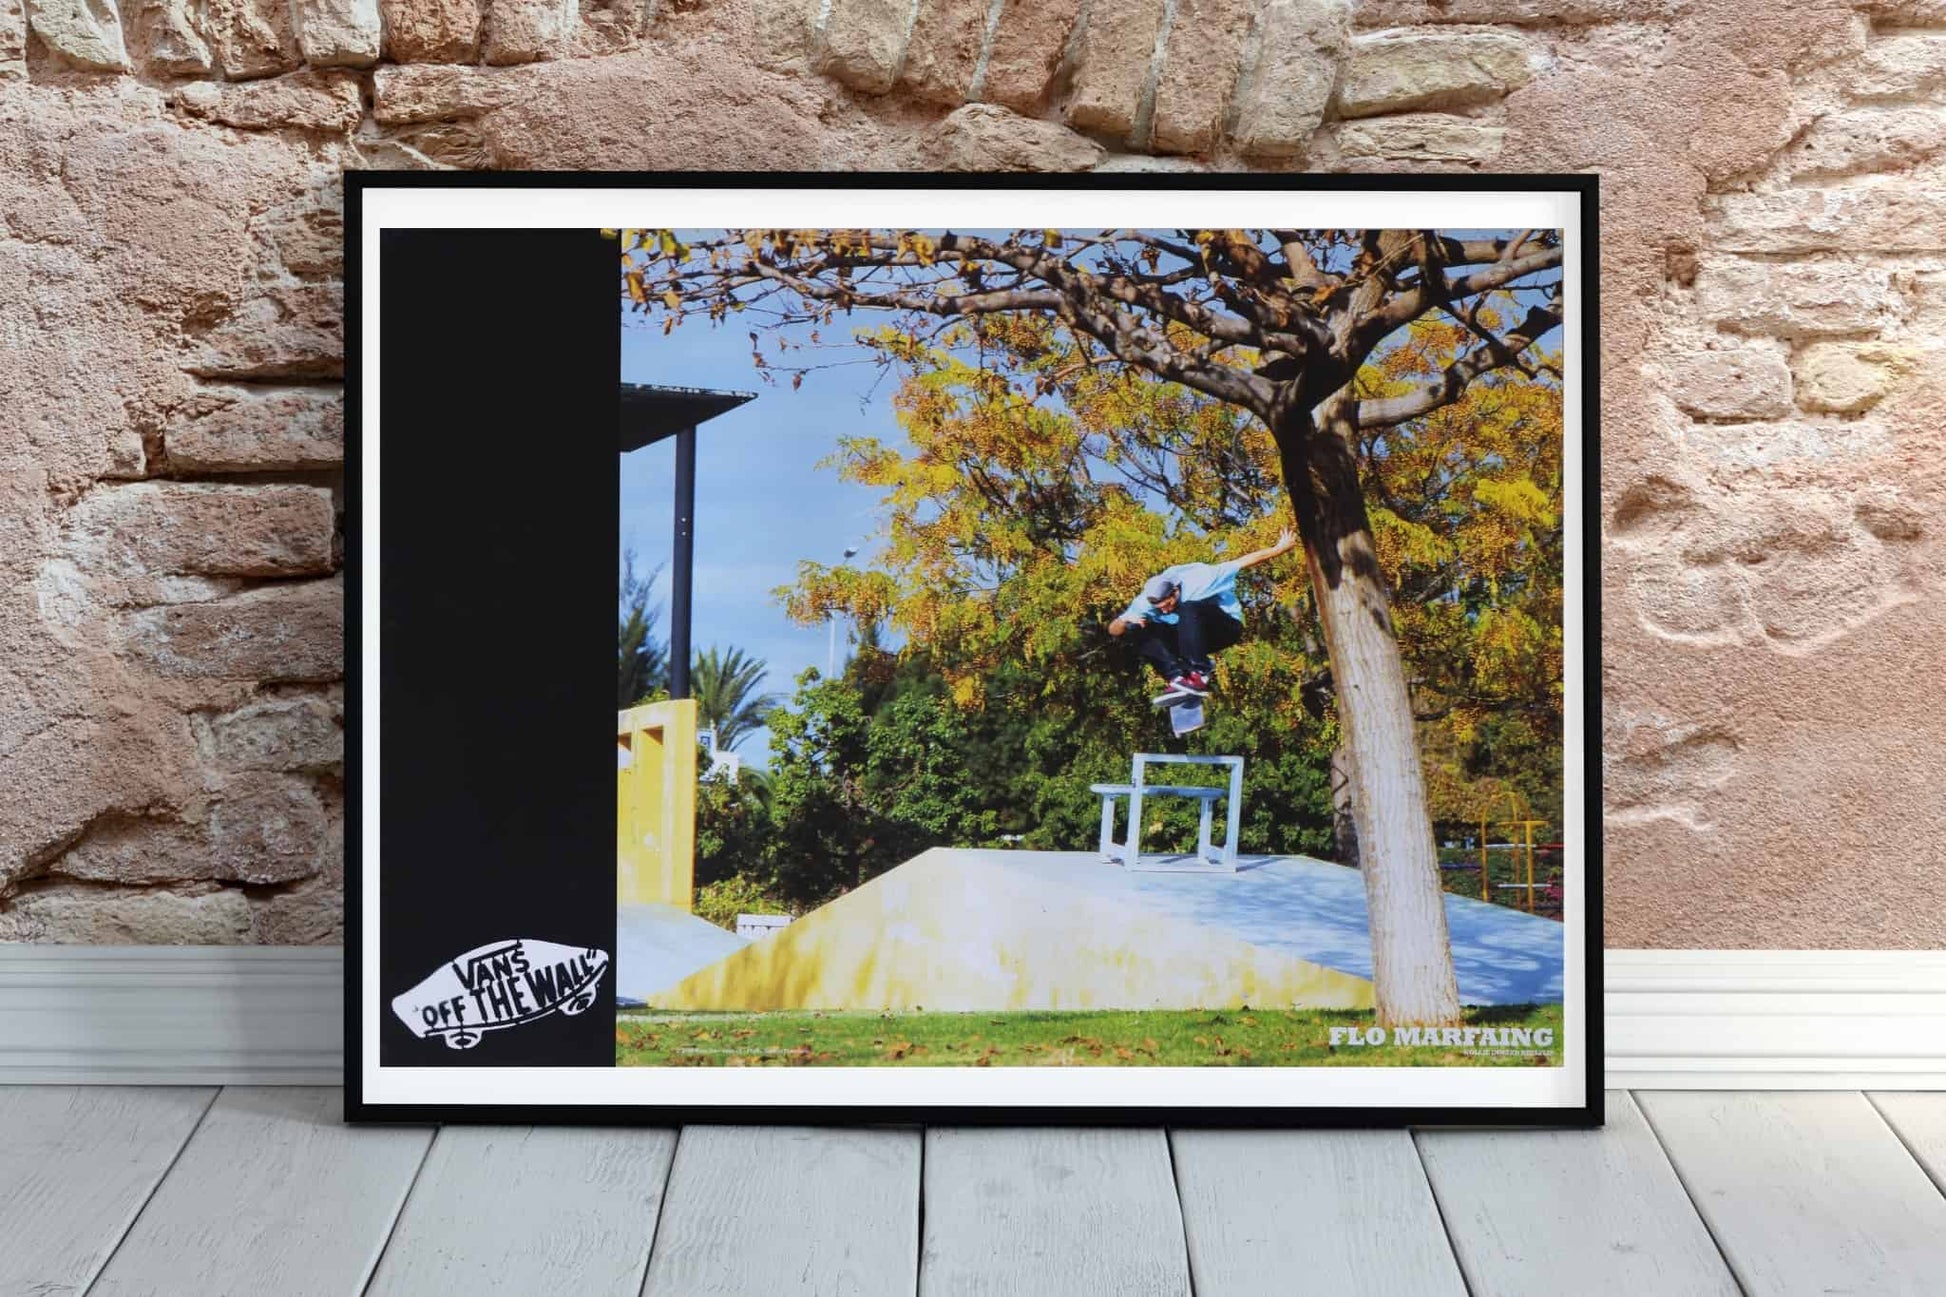 VANS Double-Sided Poster Dustin Dollin/Flo Marfaing